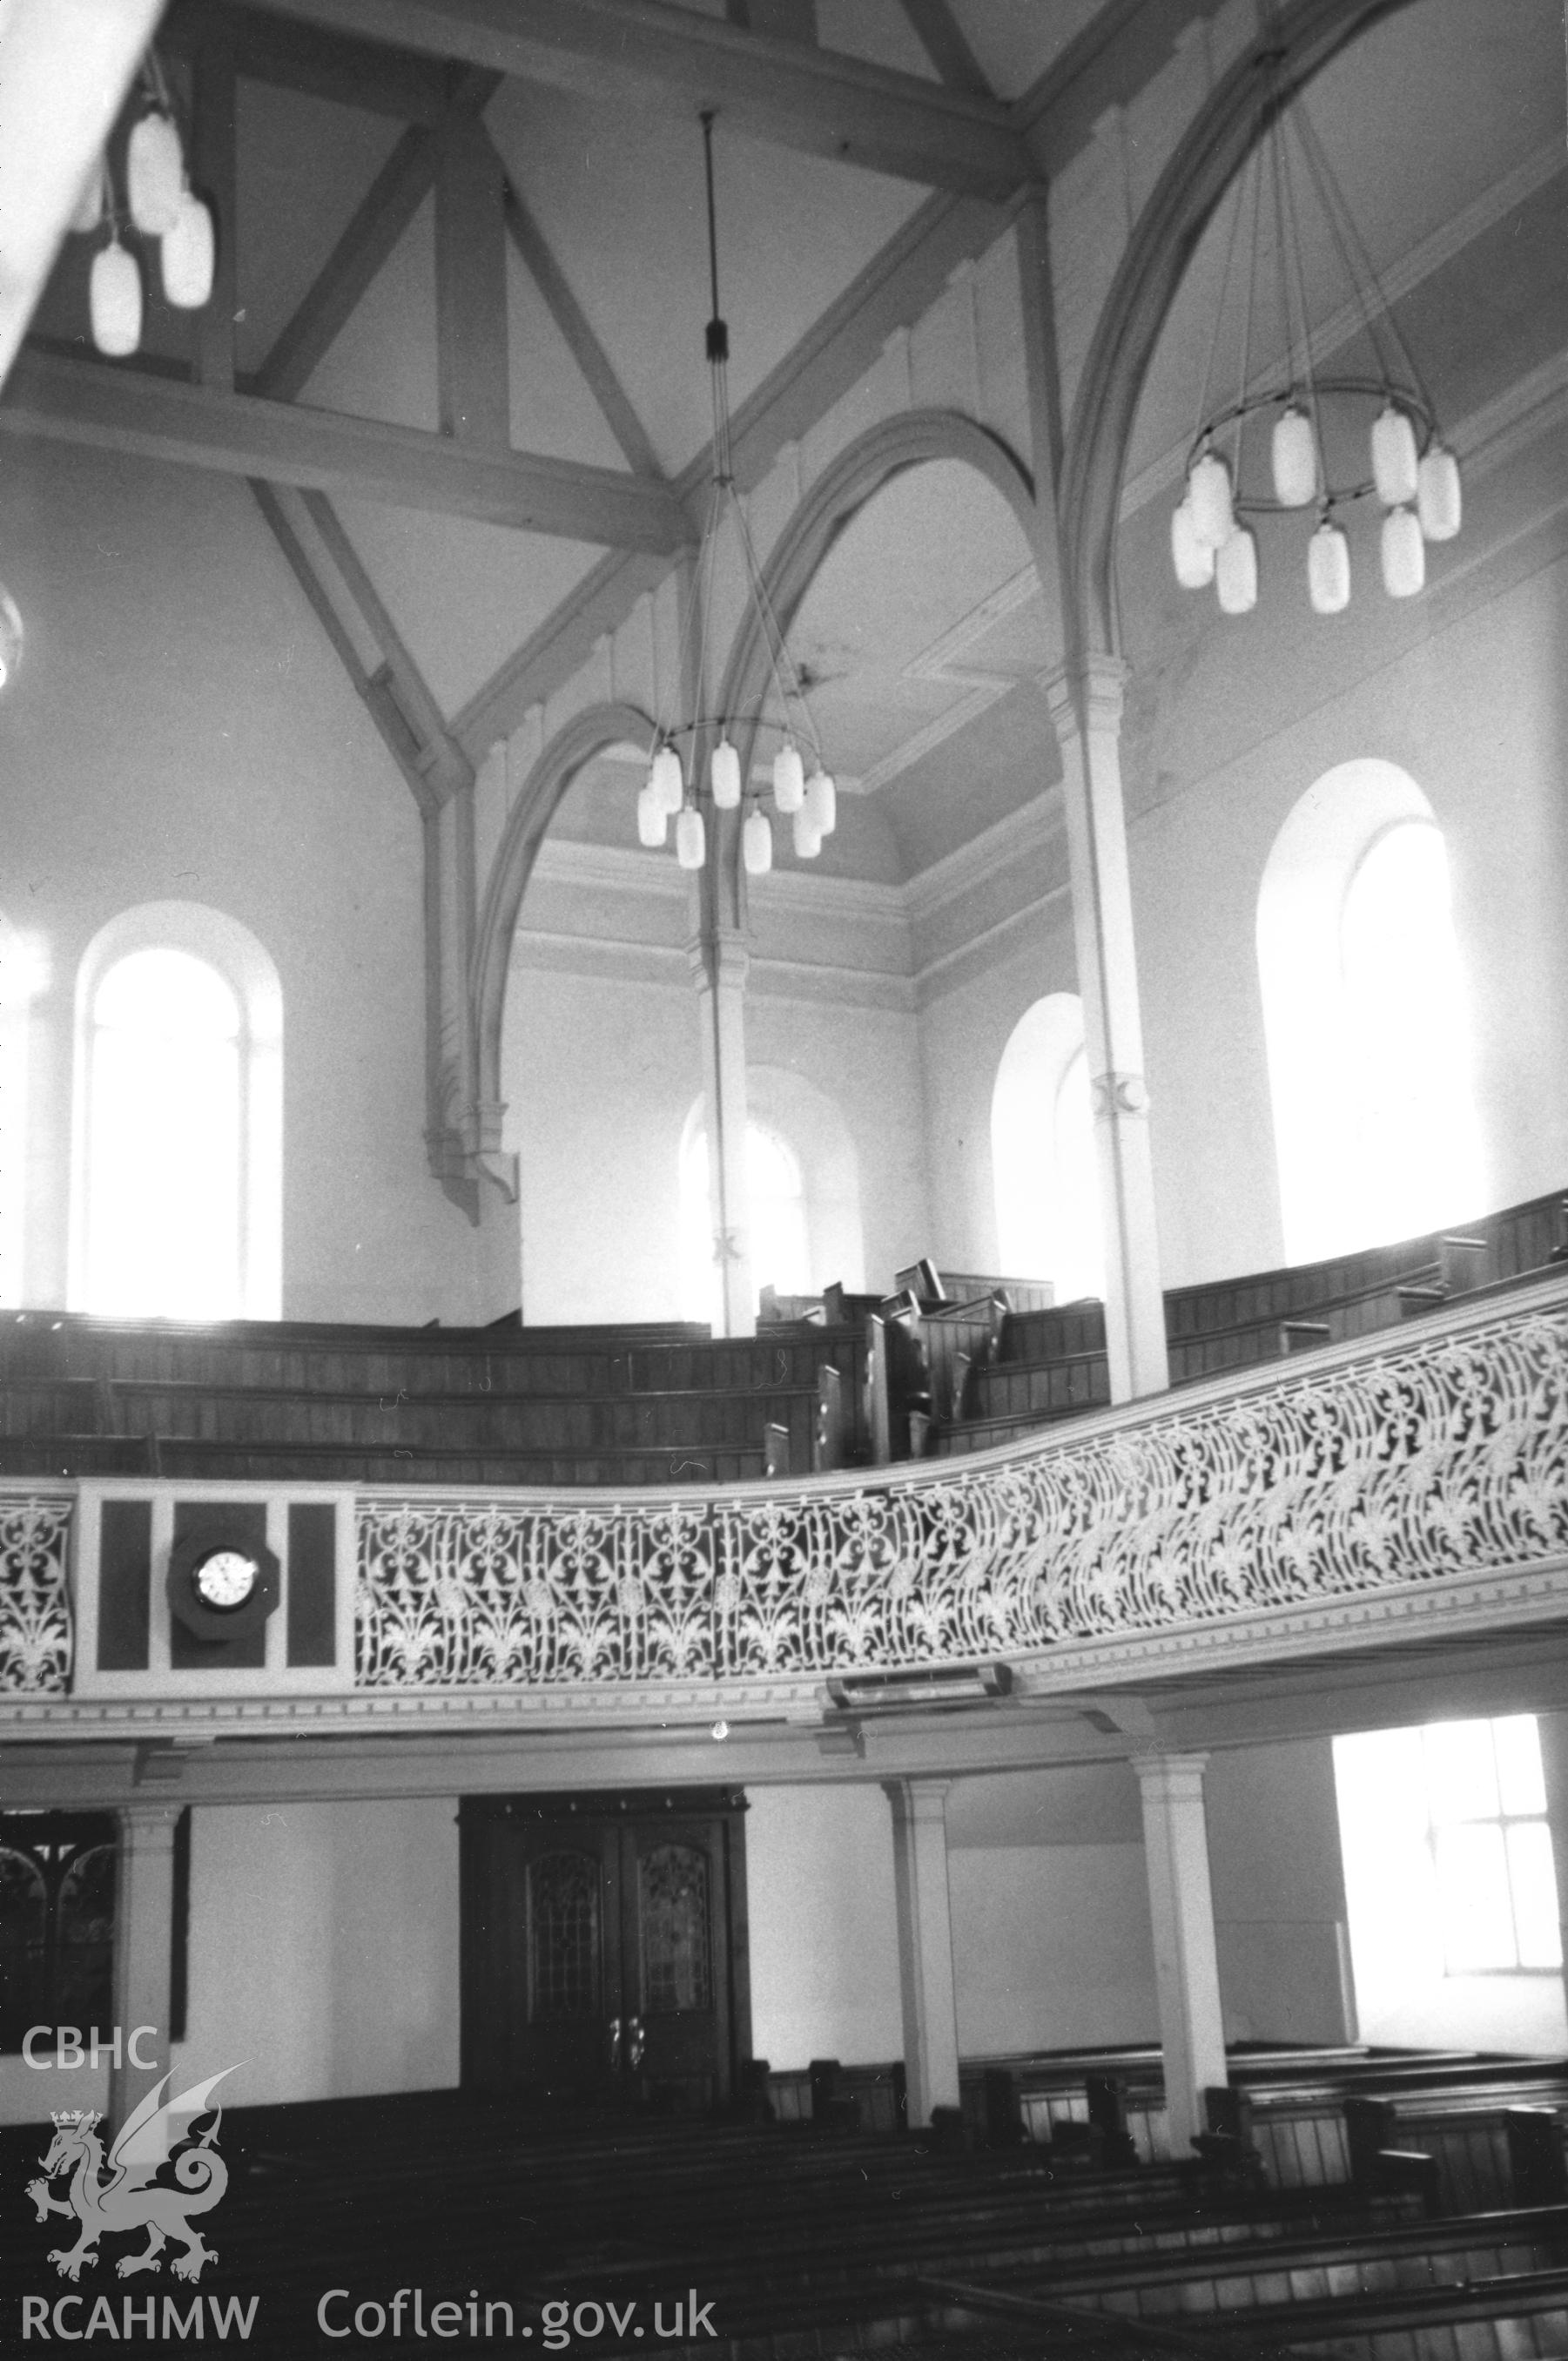 Digital copy of a black and white photograph showing an interior view of Bethany English Baptist Chapel, Pembroke Dock, taken by Robert Scourfield, c.1996.